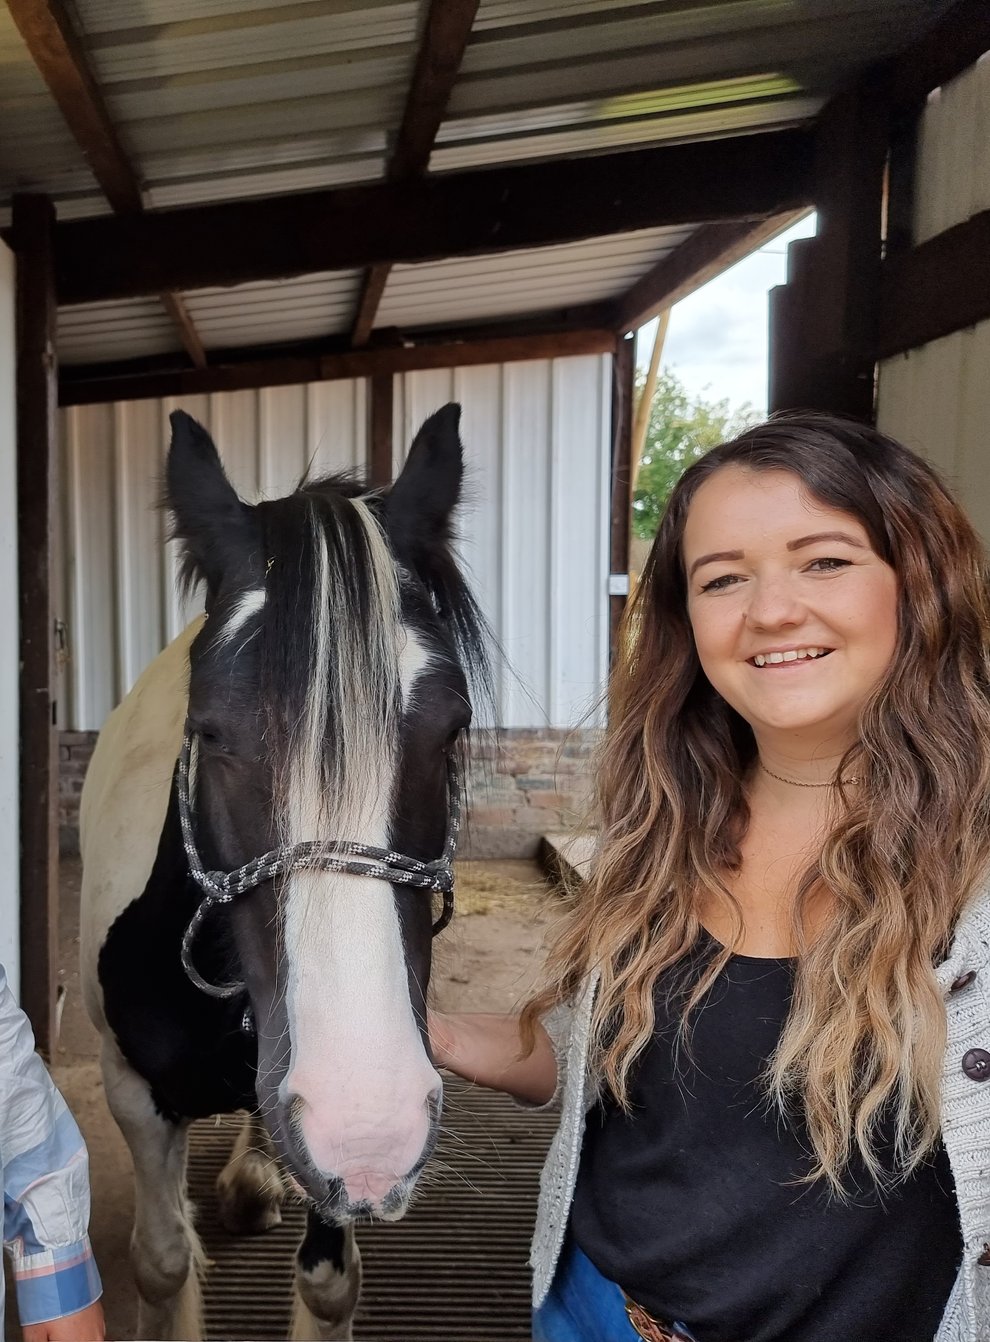 Sarah Stephens (l), founder of Spirit and Soul Equine Therapy Service, and Bethany Finch, of Healing with Horses in Widnes, Cheshire, with horse Dixie who will be providing therapy to cancer patients as part of the service, run in partnership with Macmillan (Macmillan/PA)